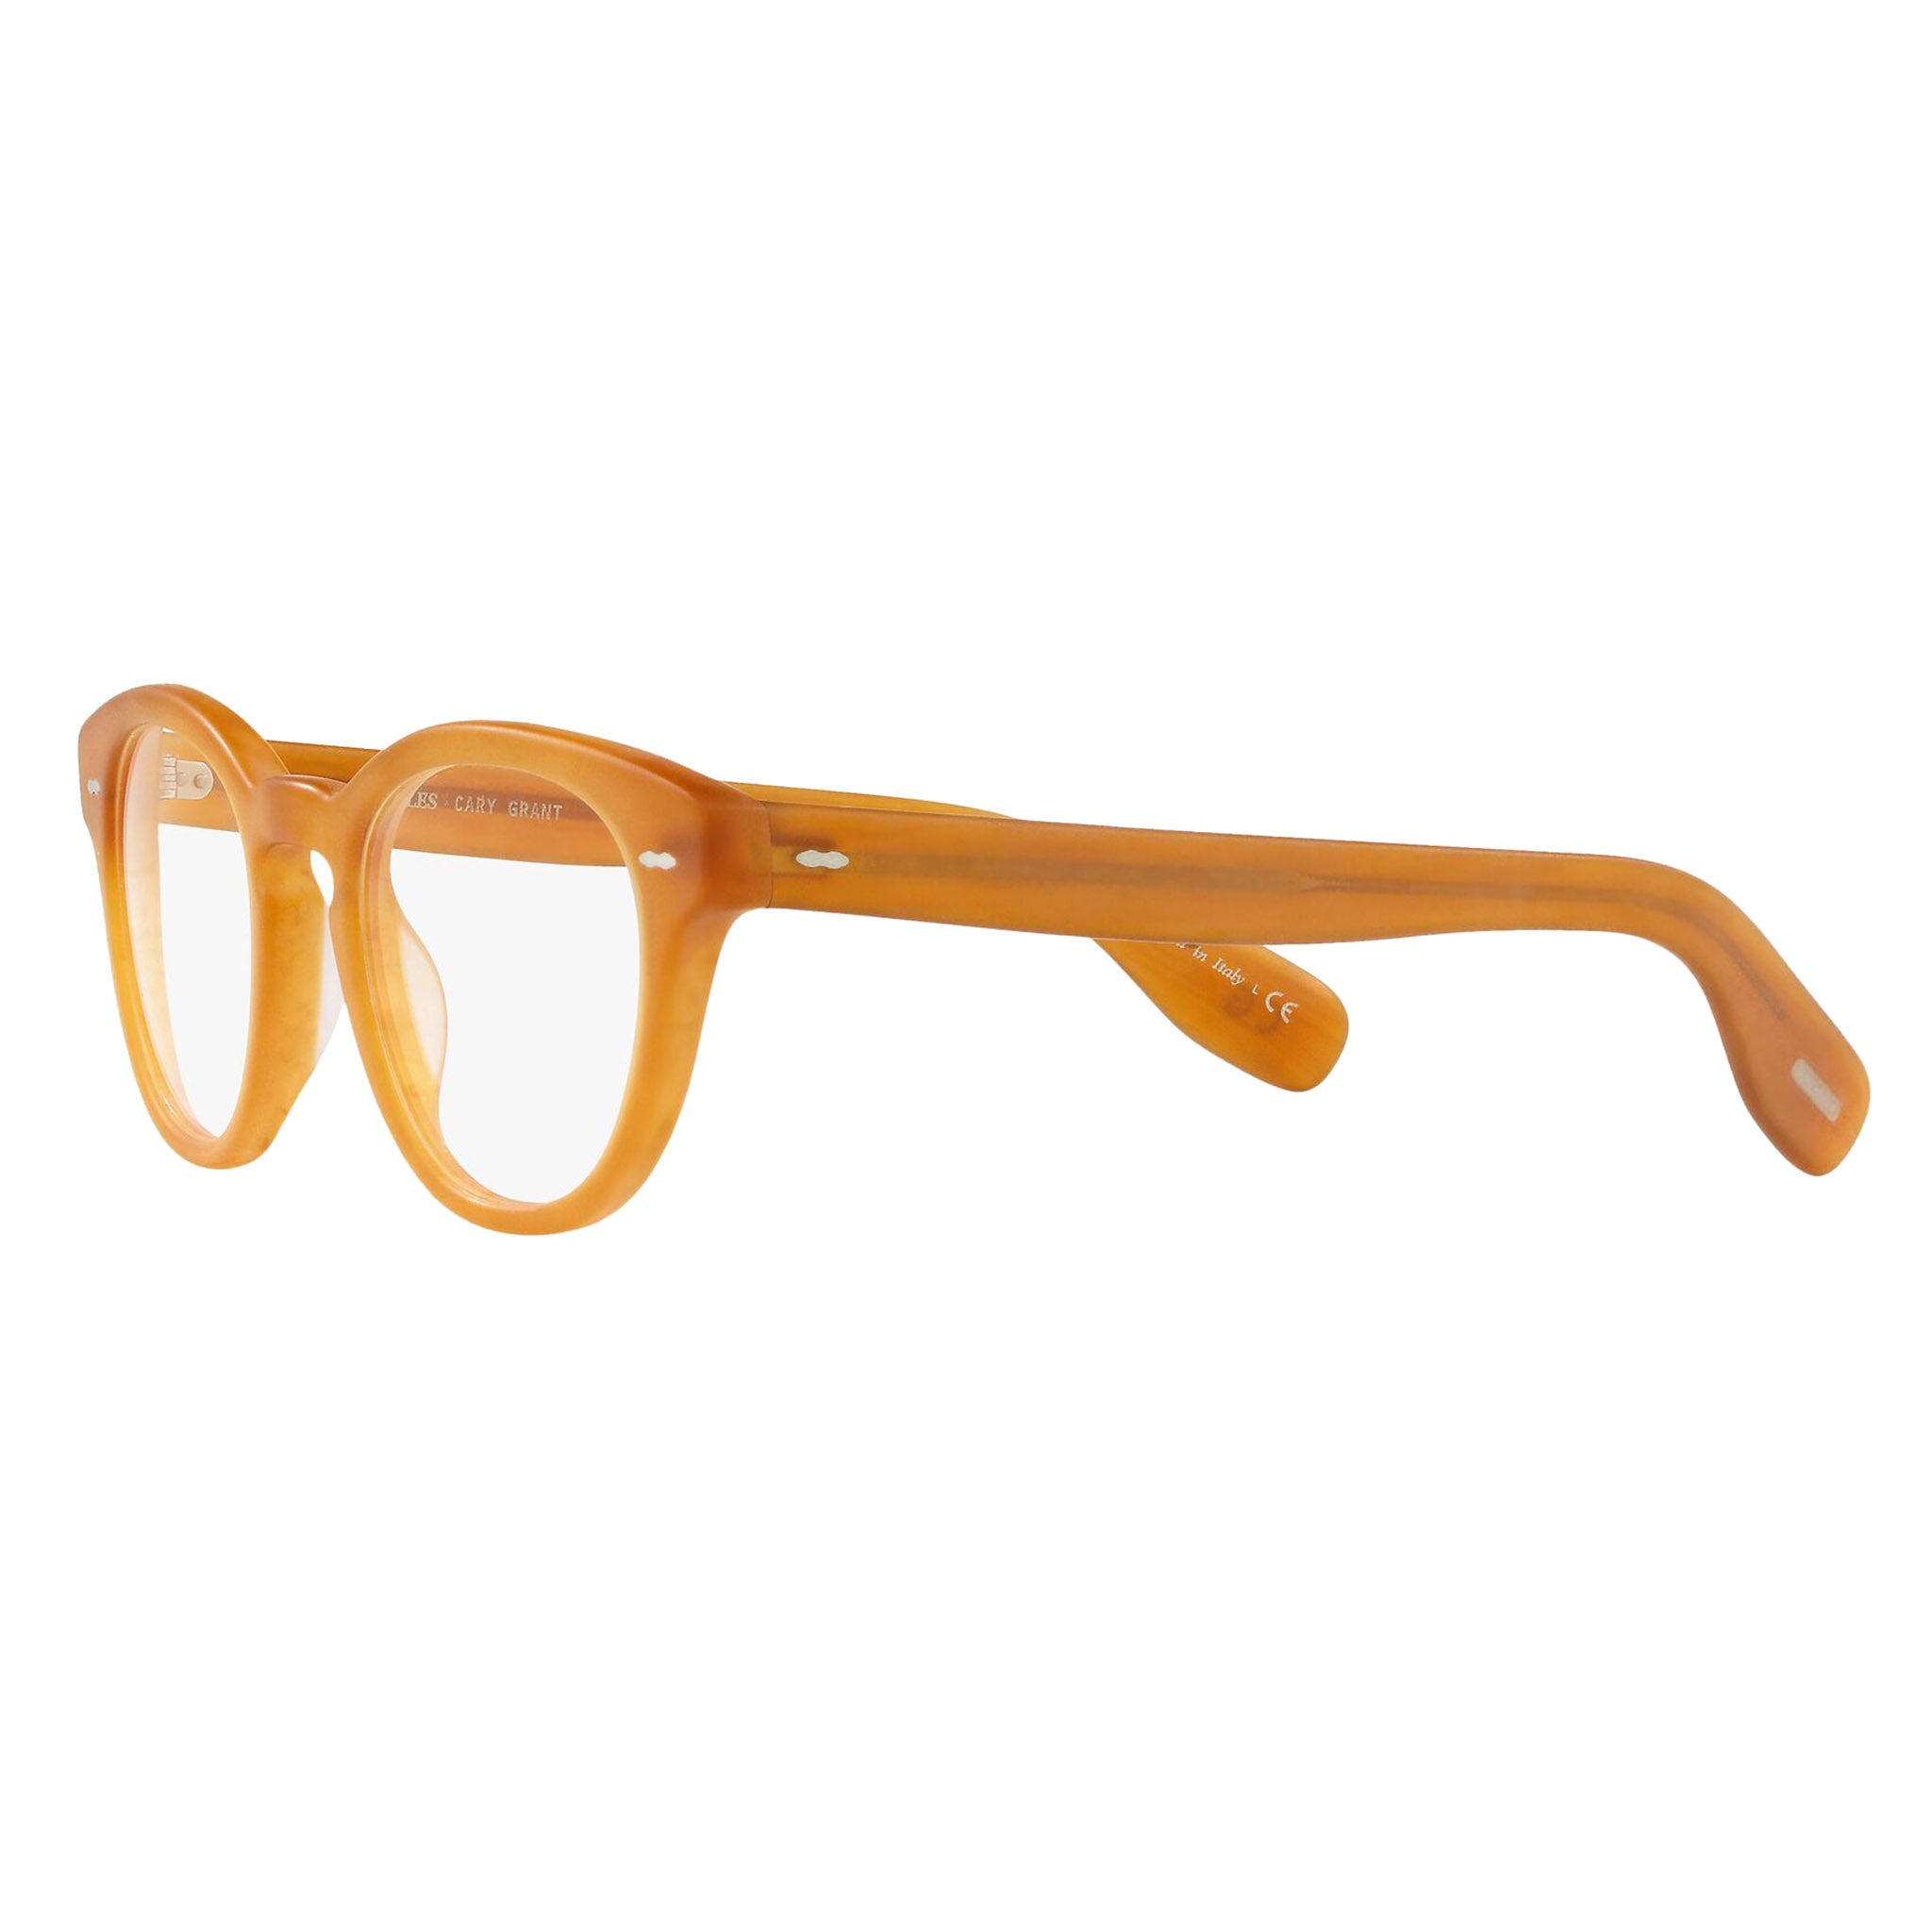 Oliver Peoples Cary Grant Semi Matte Amber Tortoise Rx